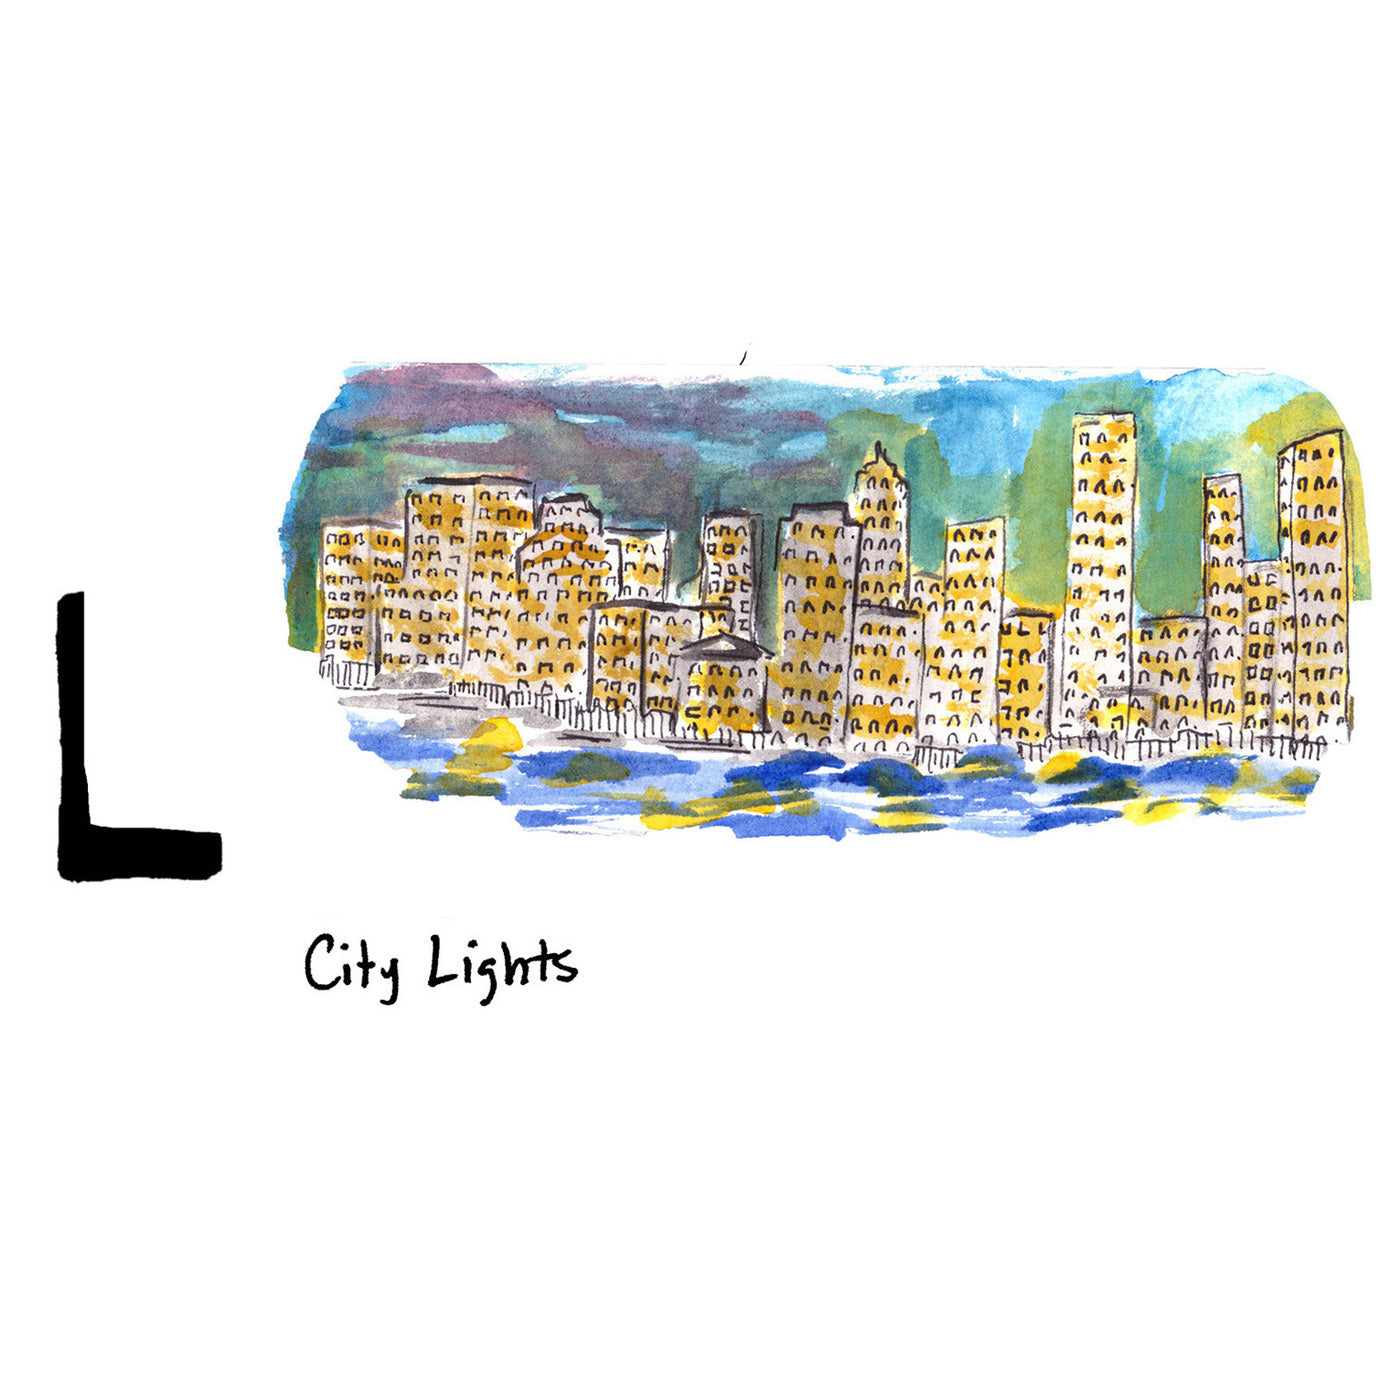 L is for City Lights. The Manhattan skyline is one of the most iconic in the world.